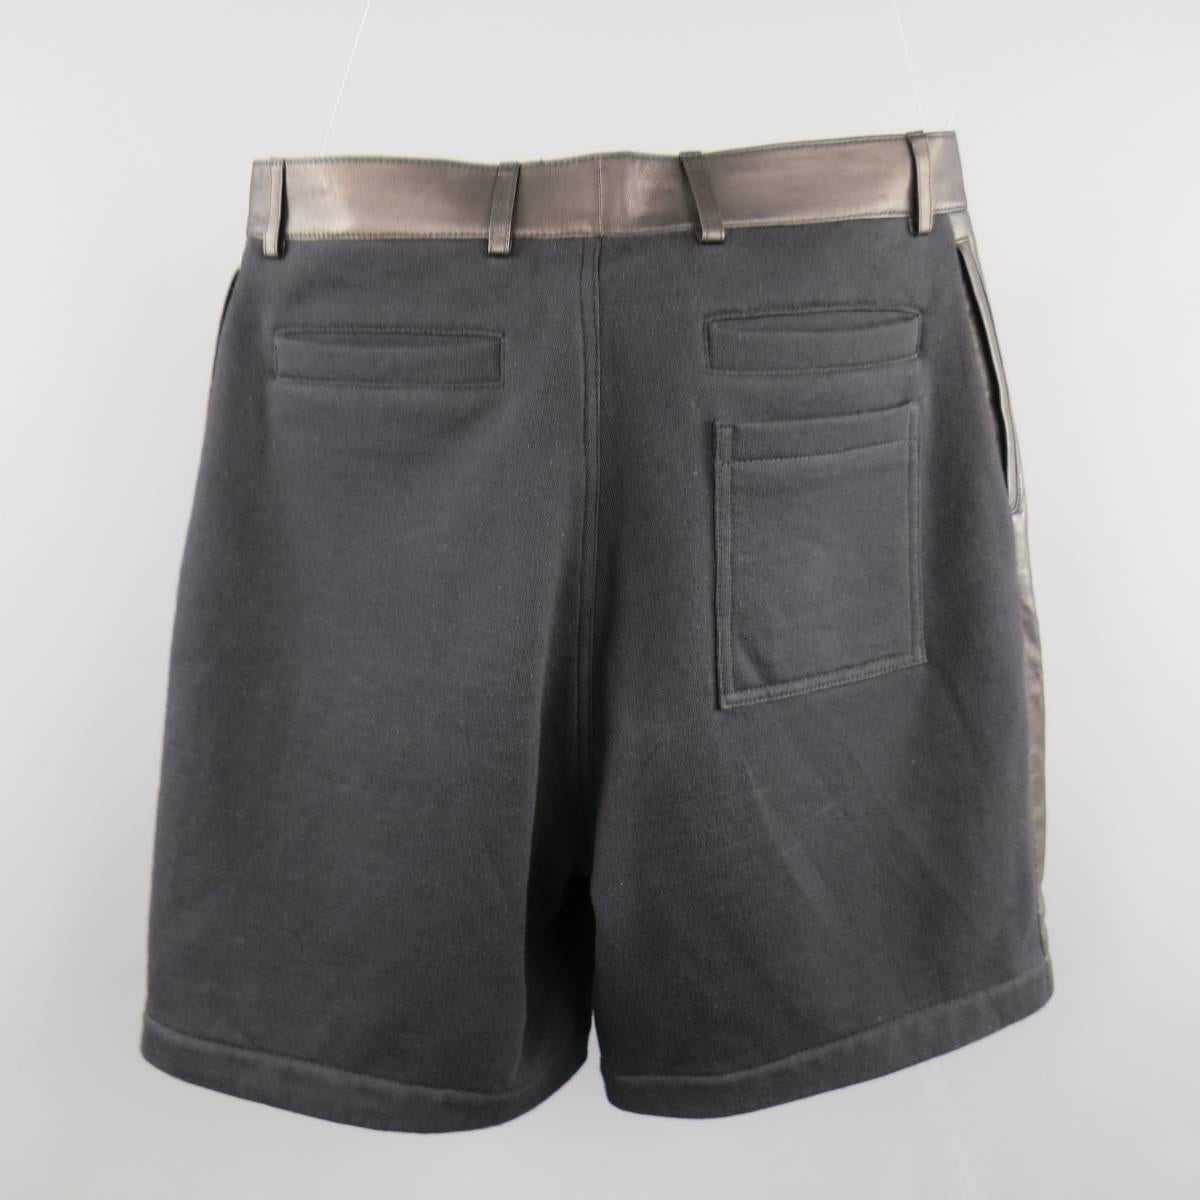 Gray Men's GIVENCHY Size 30 Pleated Leather Knit Back Bermuda Shorts